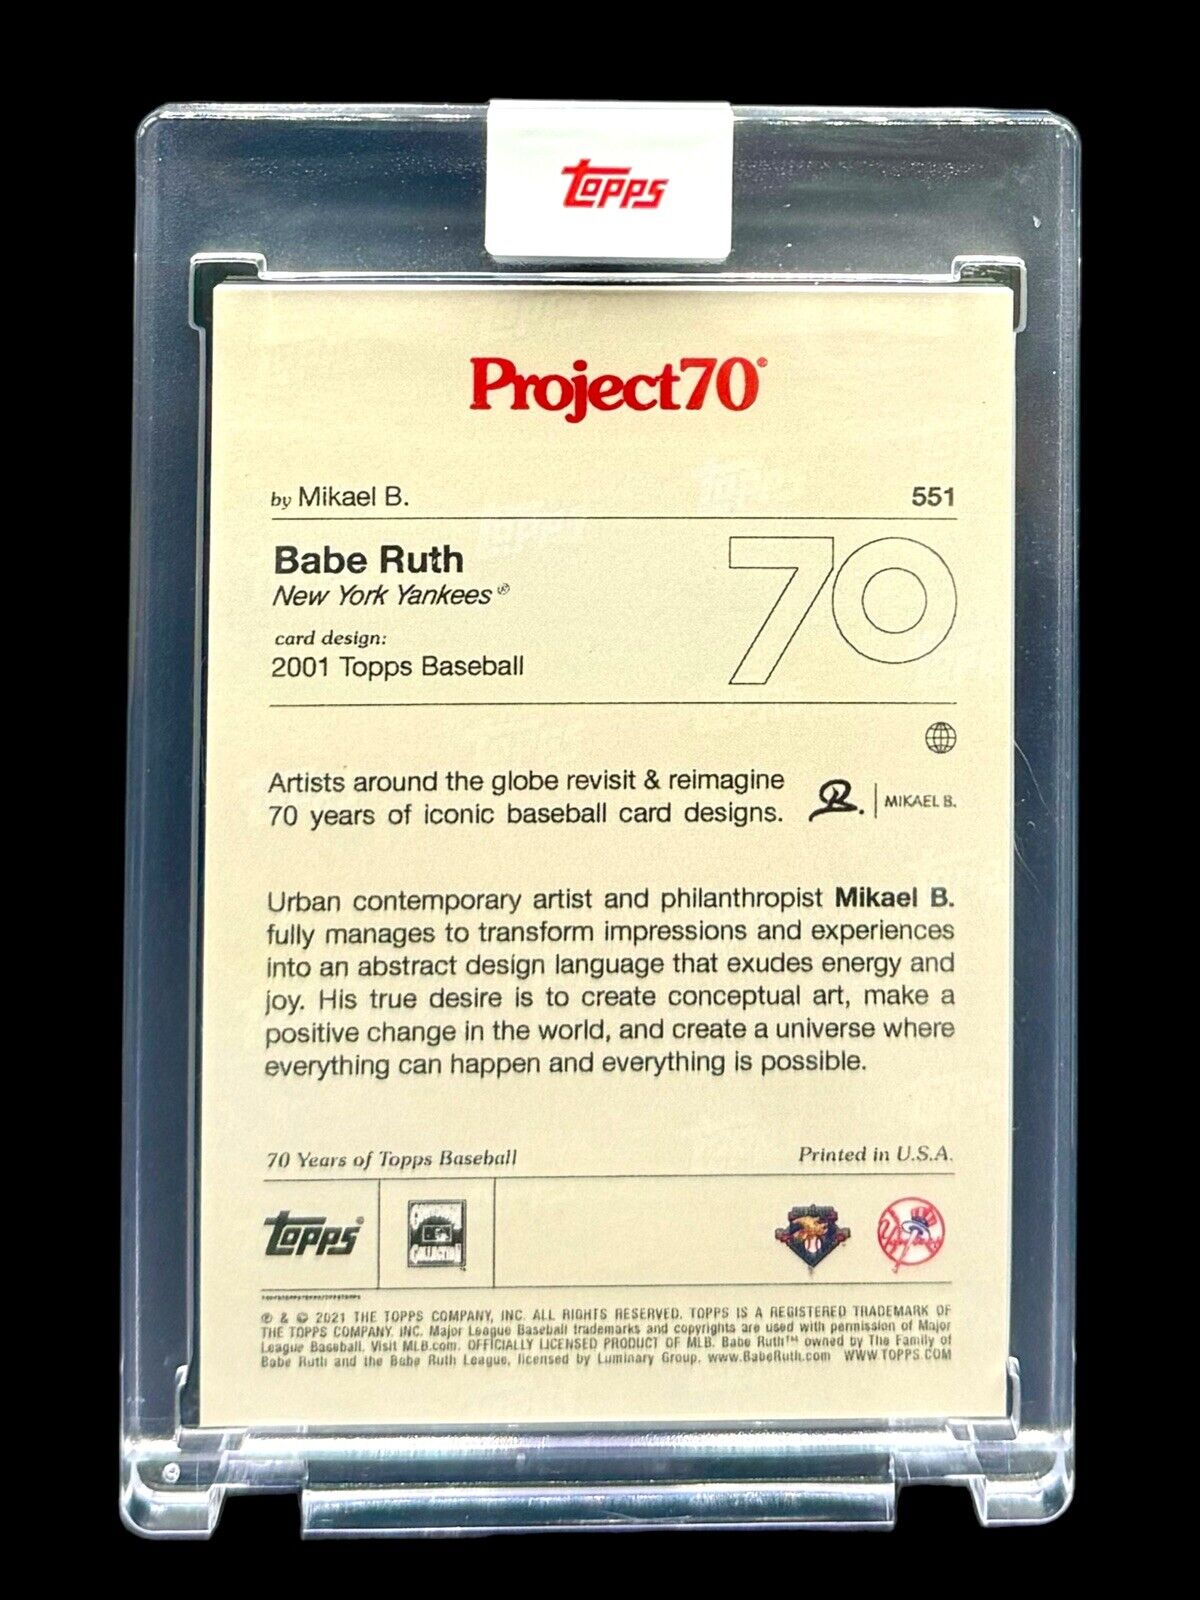 2001 Project70 #551 - Babe Ruth by Mikael B Yankees - Print Run: 1,917